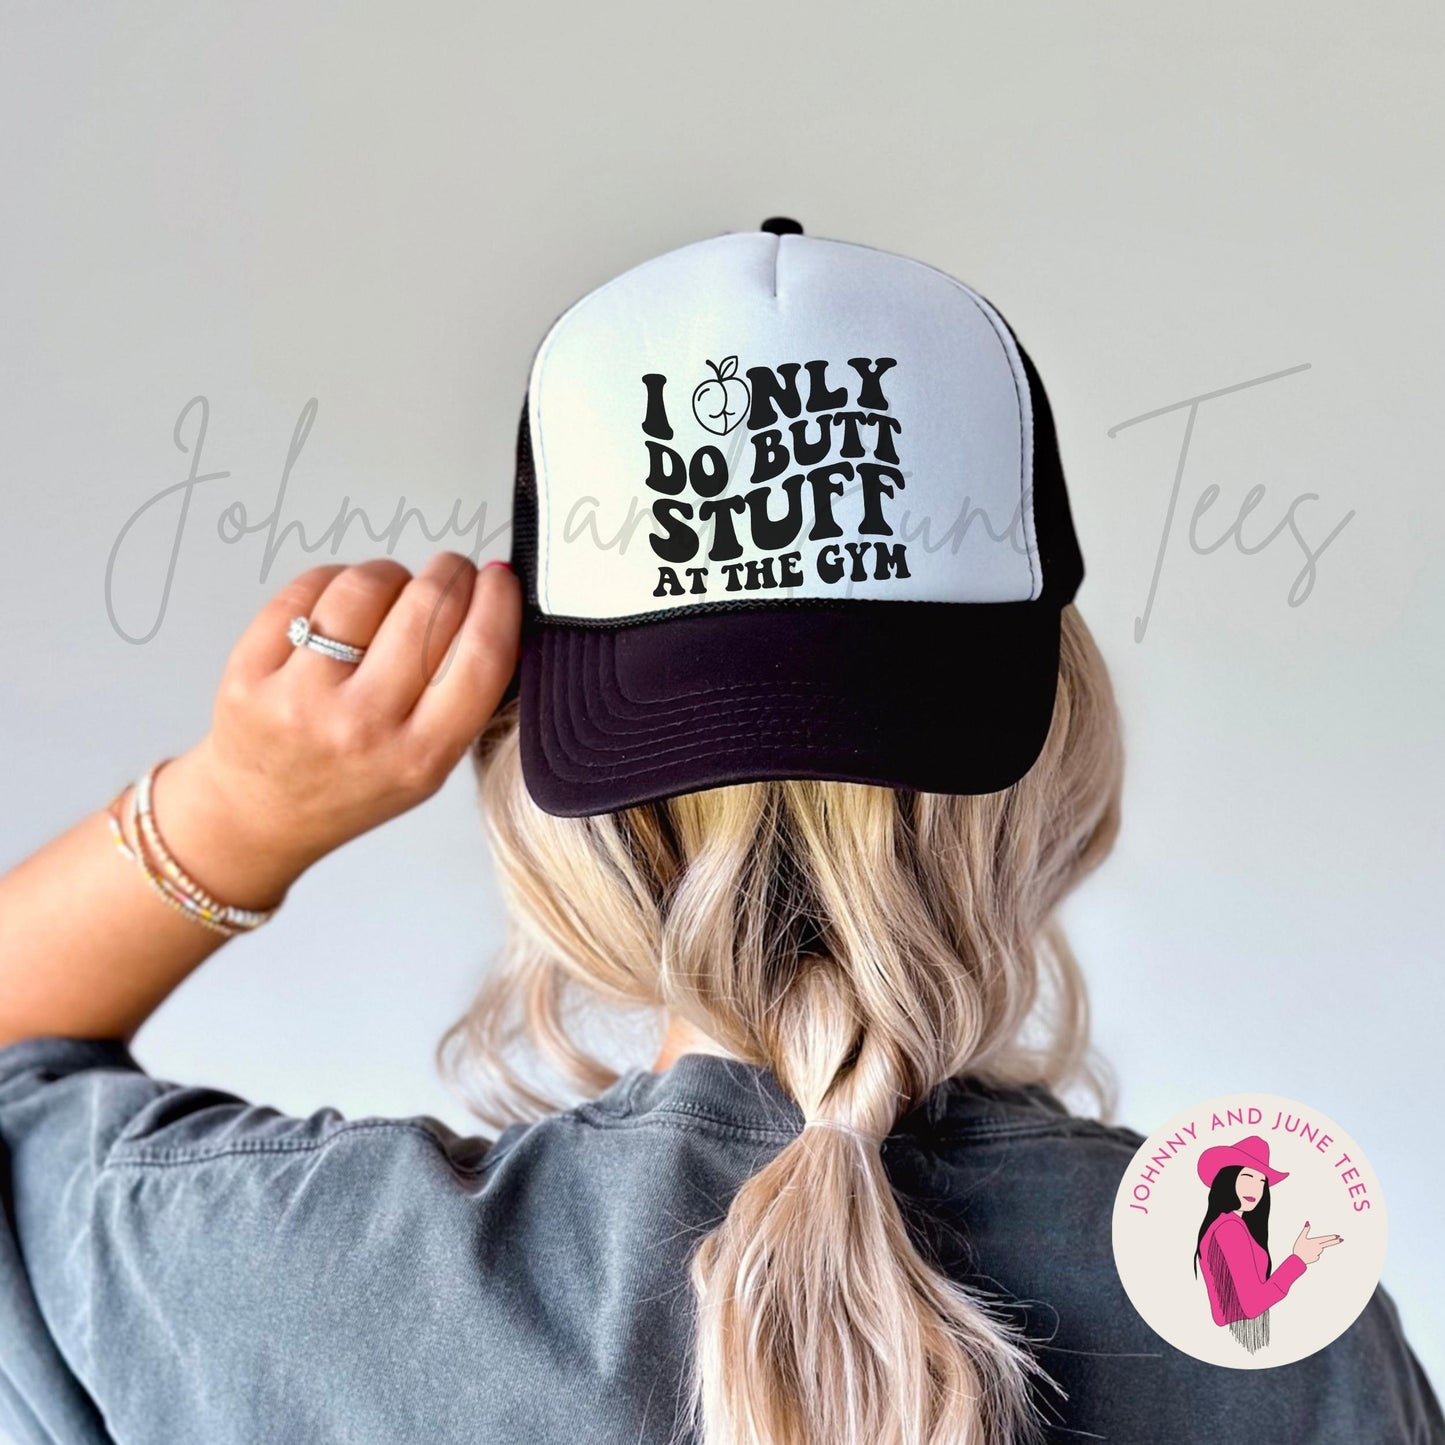 I Only Do Butt Stuff At The Gym Trucker Hat, Retro Trucker Cap, Gym Hat, Squat Booty